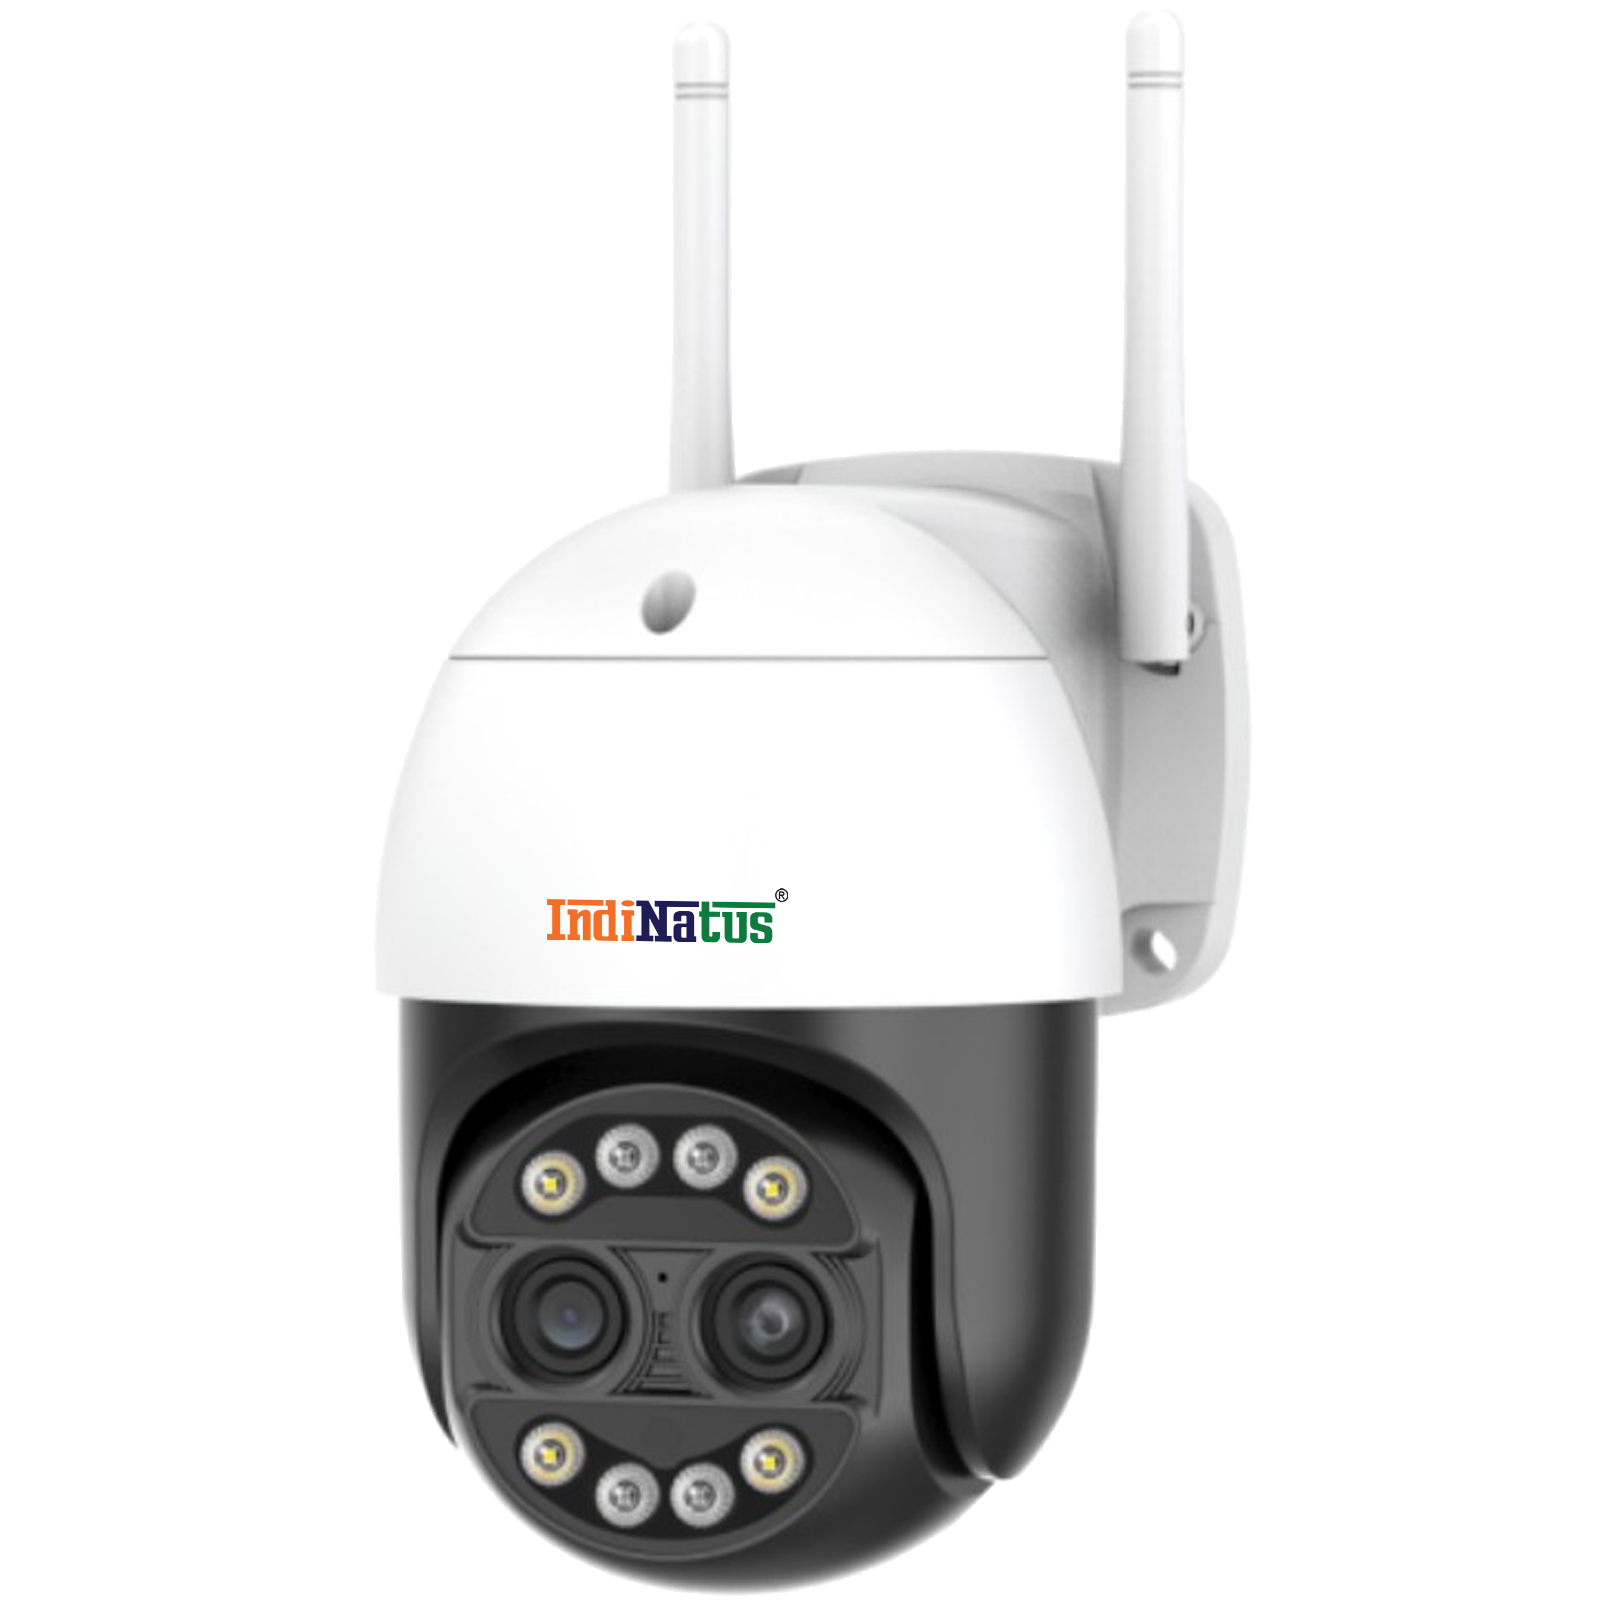  3MP IP 4G Network PTZ Camera , IN-PT7E24P-5X,  IndiNatus® India Private Limited - India Ka Apna Brand, Indian CCTV  Brand,  Make In India CCTV camera, Make in india cctv camera brand available on gem portal, IP Network Camera, Indian brand CCTV Camera, Best OEM Of CCTV in India      